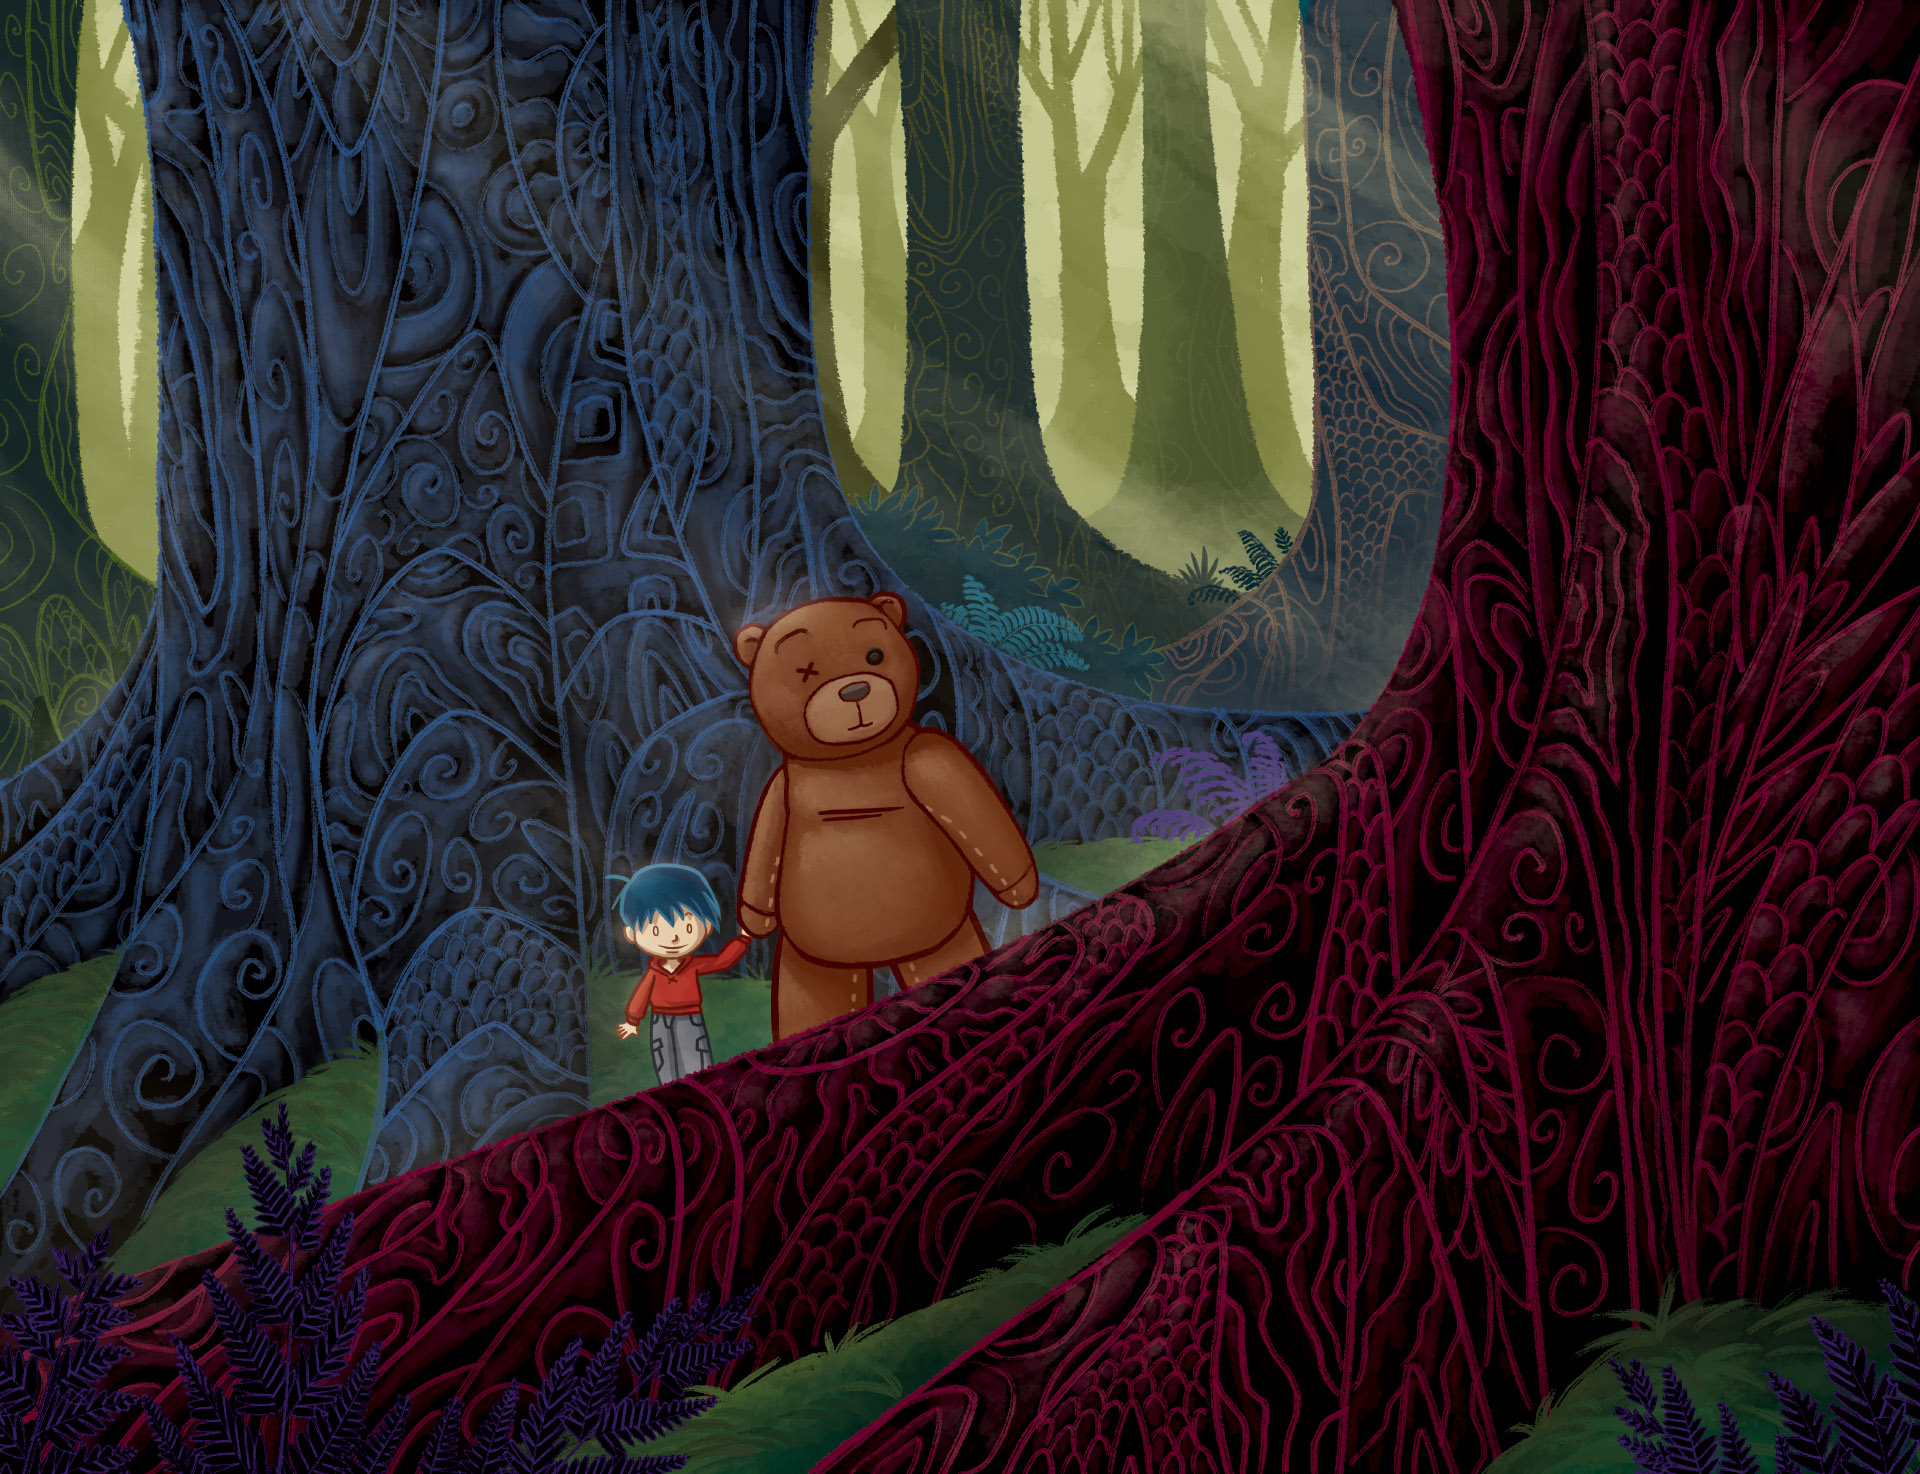 In the Forest - Illustration © Stefano Patanè